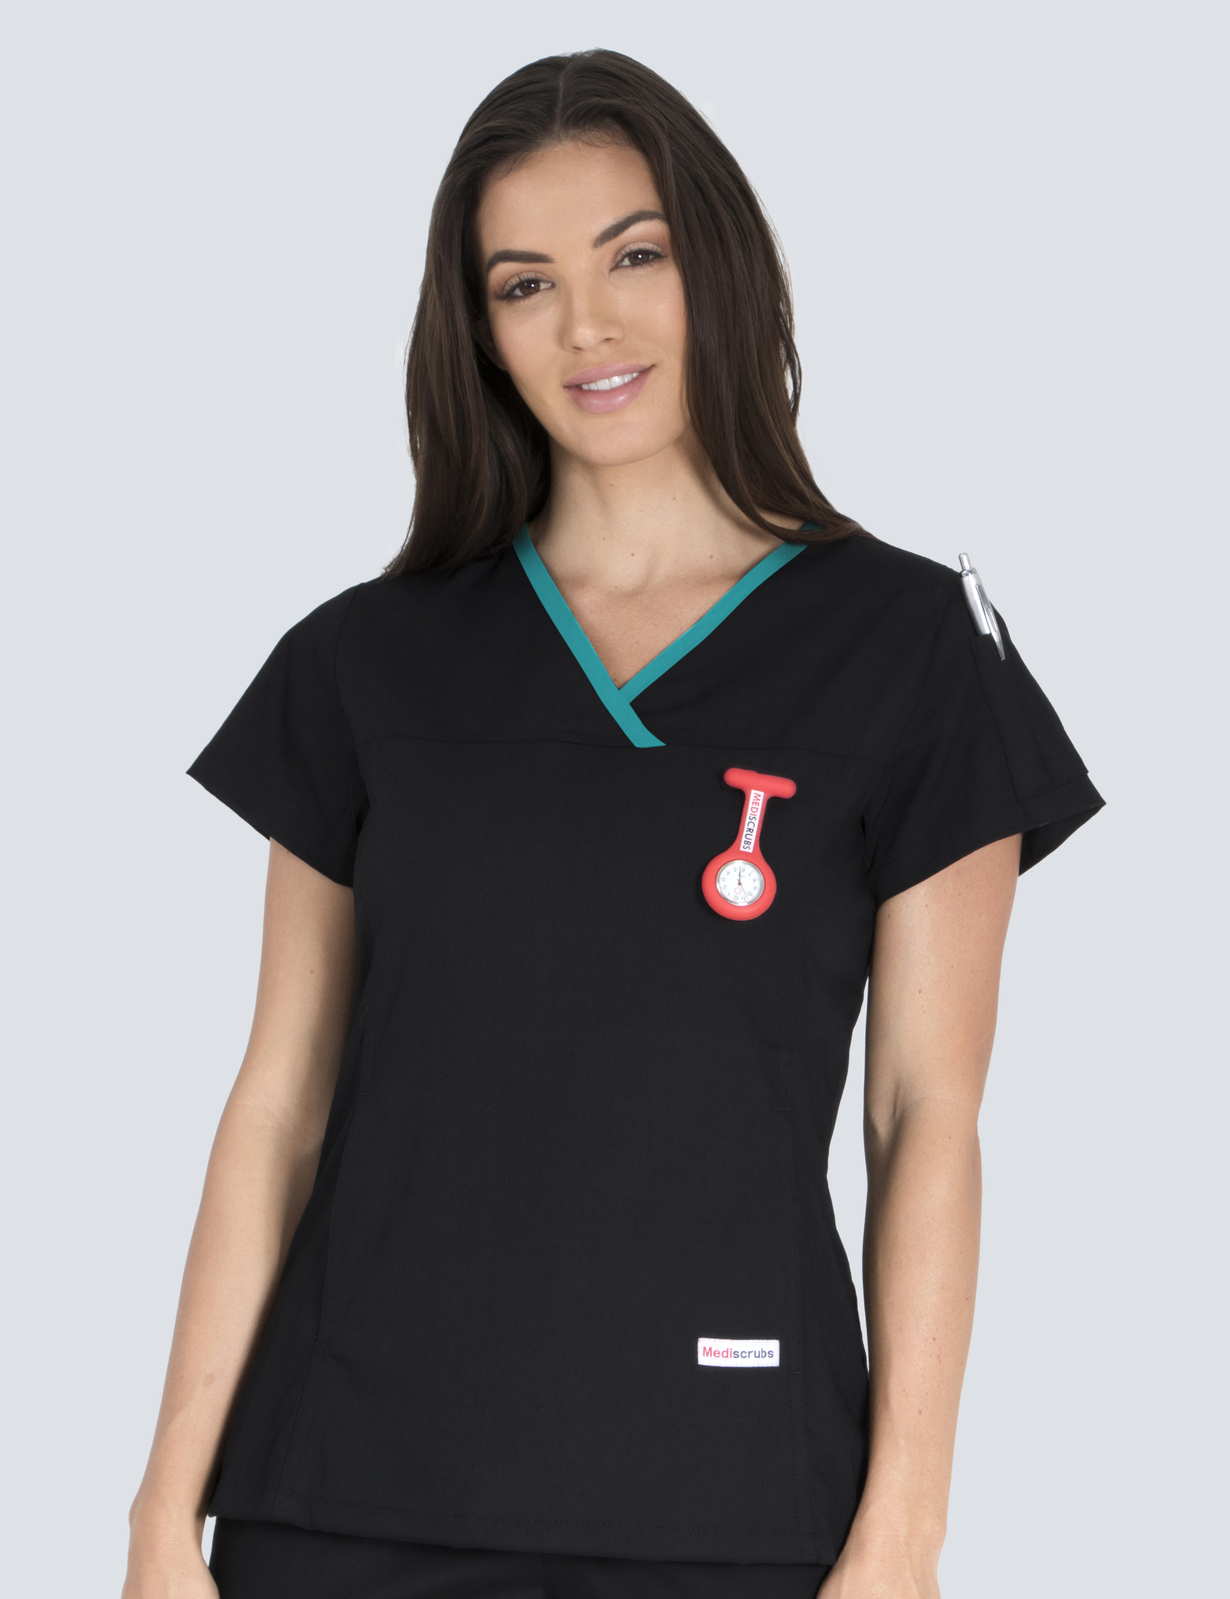 Caboolture Hospital - ICU AIN (Women's Fit Solid in Black incl Logos)